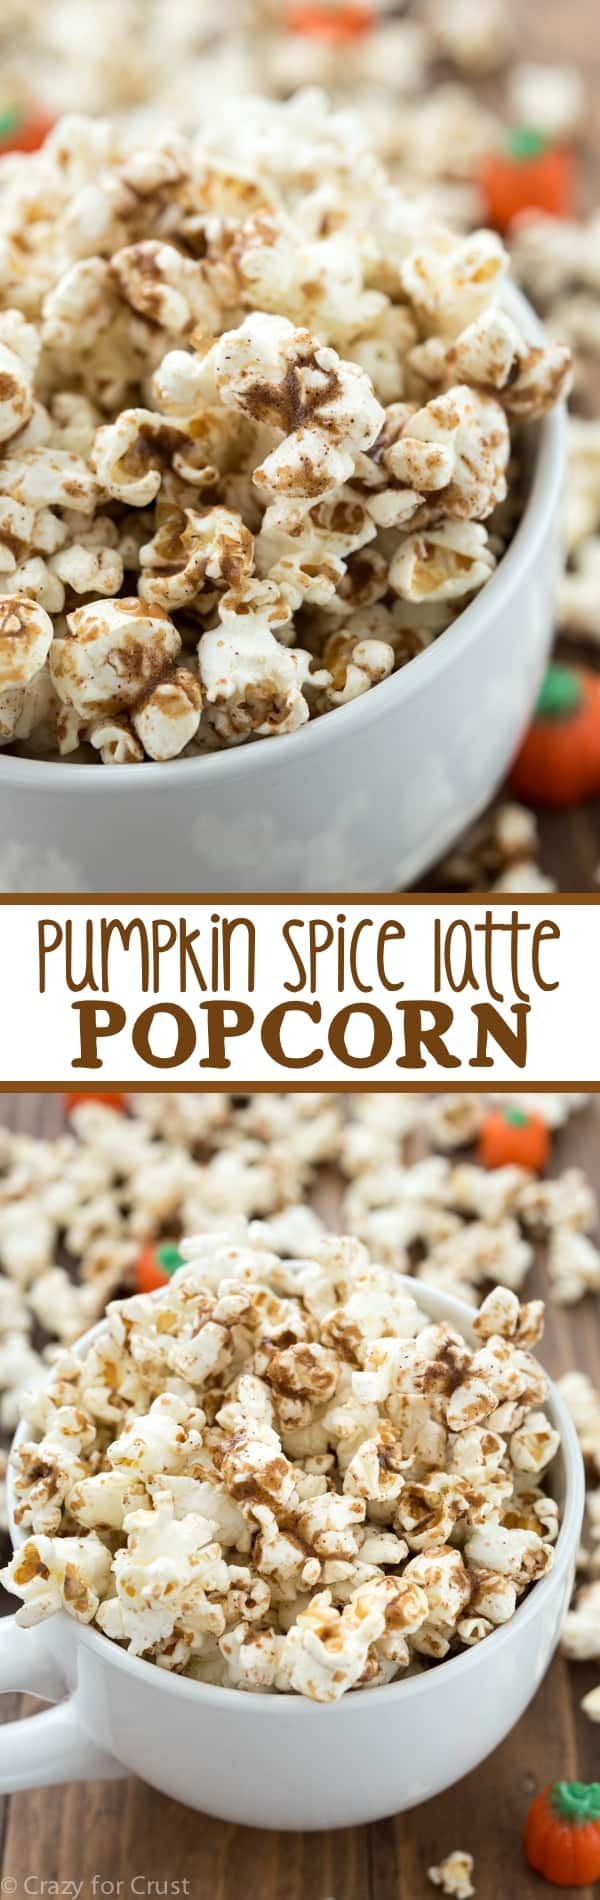 Pumpkin Spice Latte Popcorn - an easy and fast recipe that turns the pumpkin spice latte into a popcorn recipe!